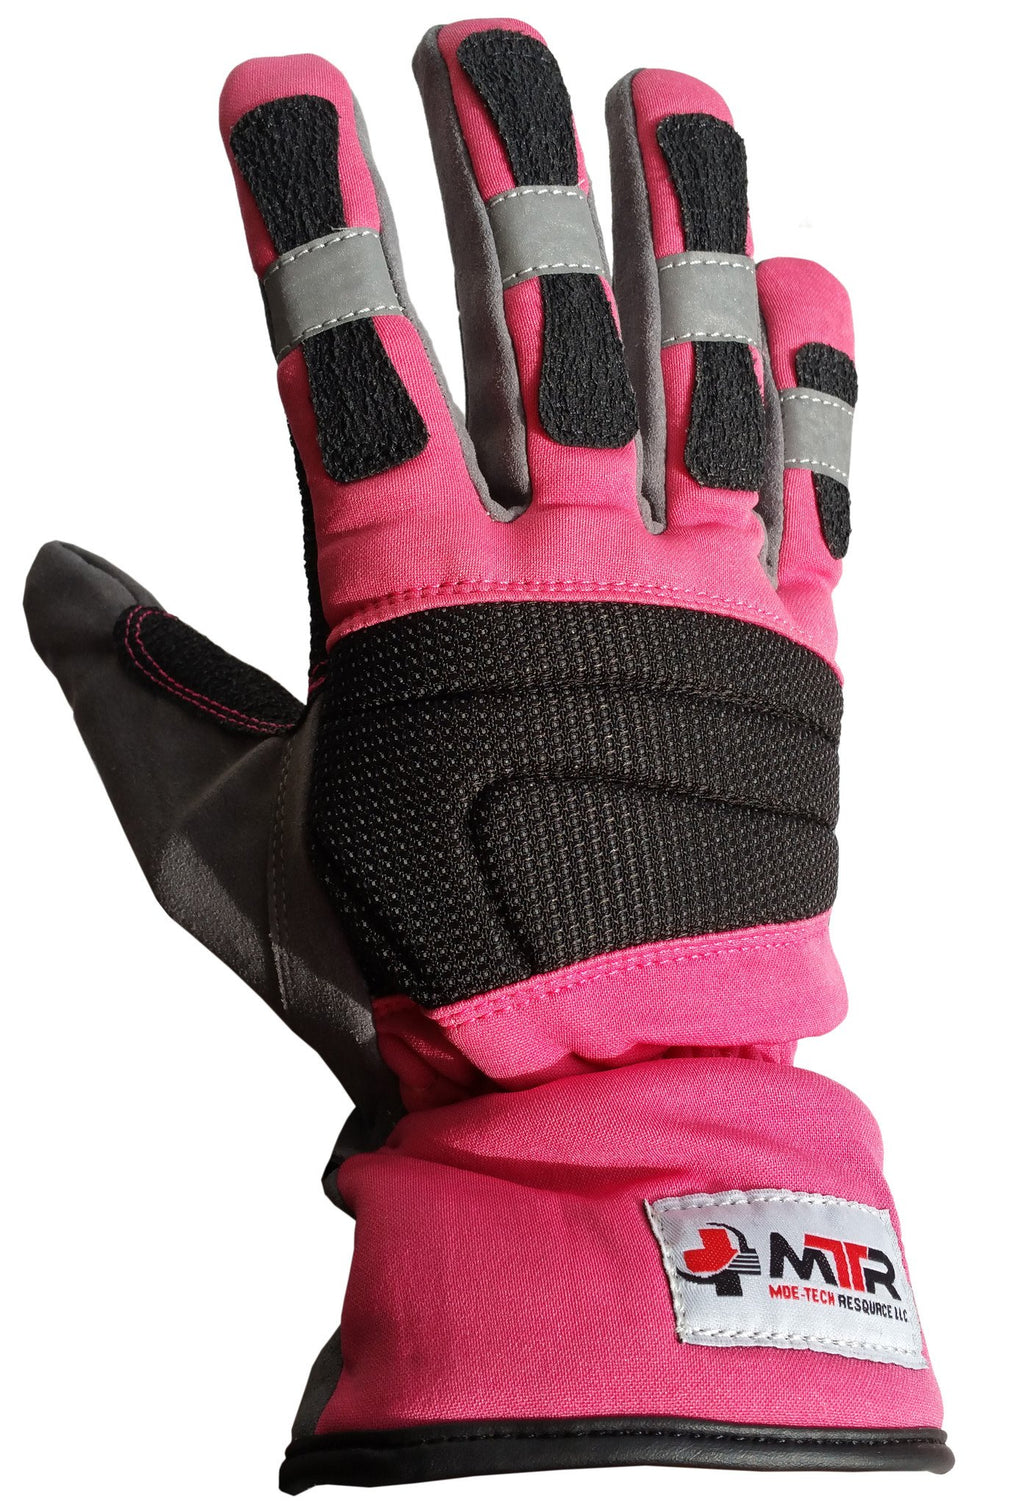 GRX ProSeries Gloves - Mechanical Hub  News, Product Reviews, Videos, and  Resources for today's contractors.